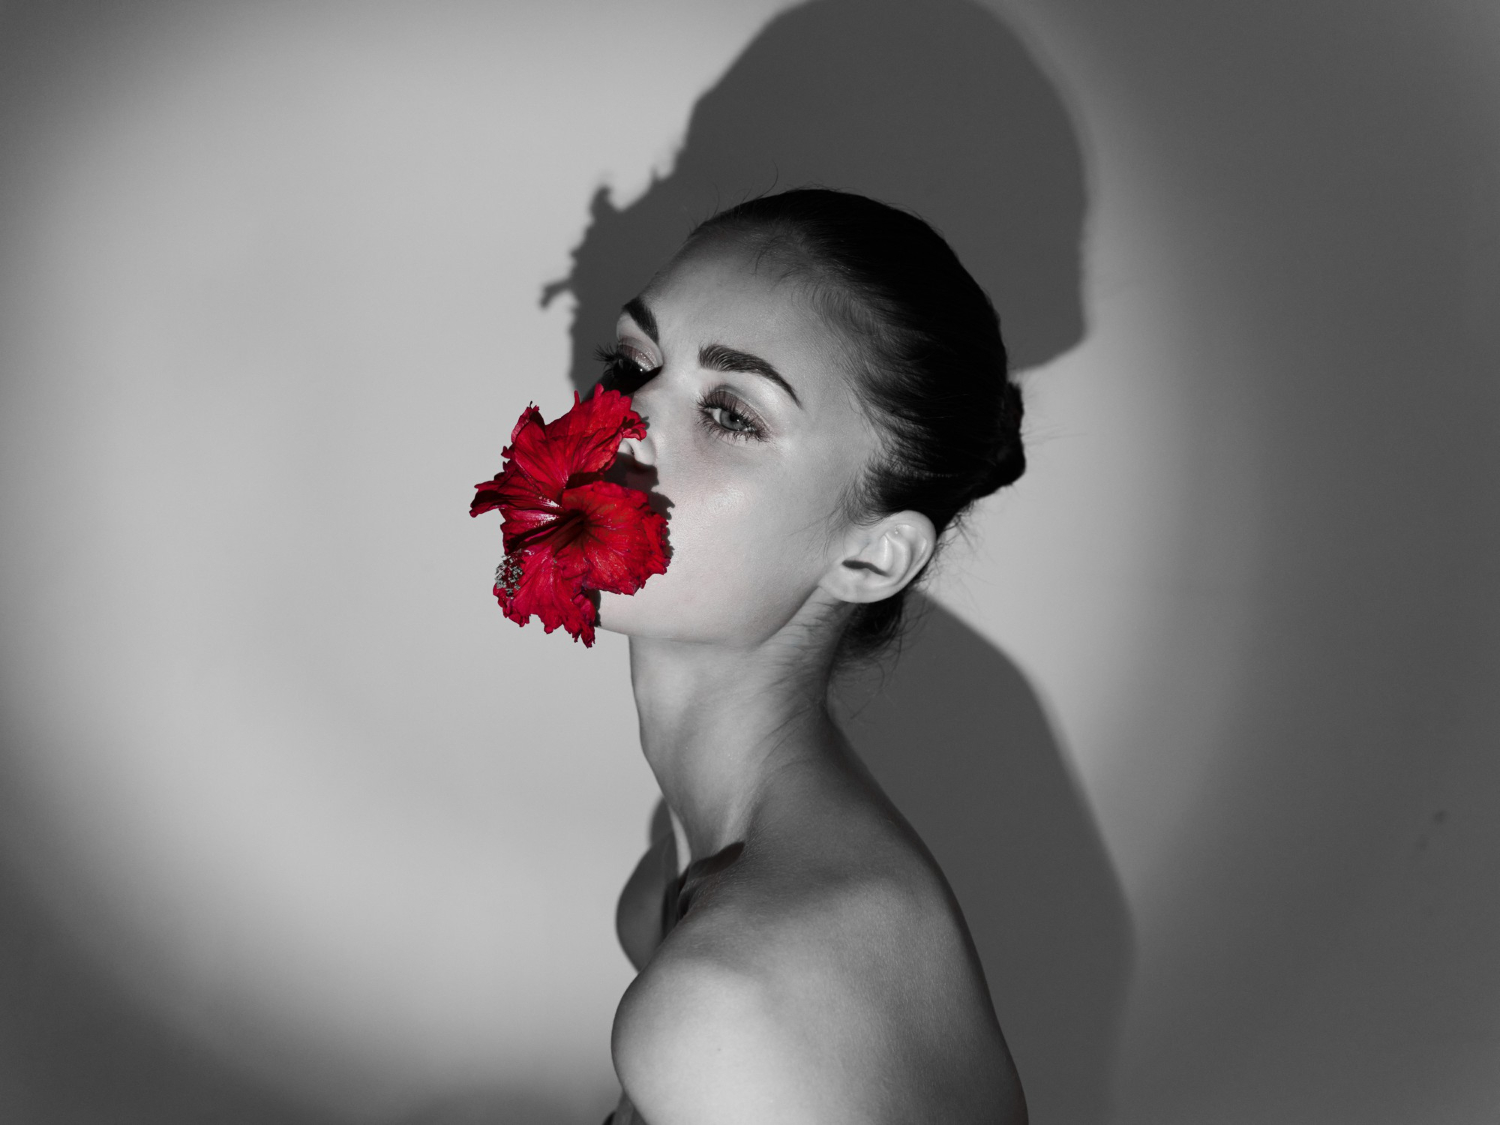 phoenix woman naked shoulders red flower her mouth black white photo